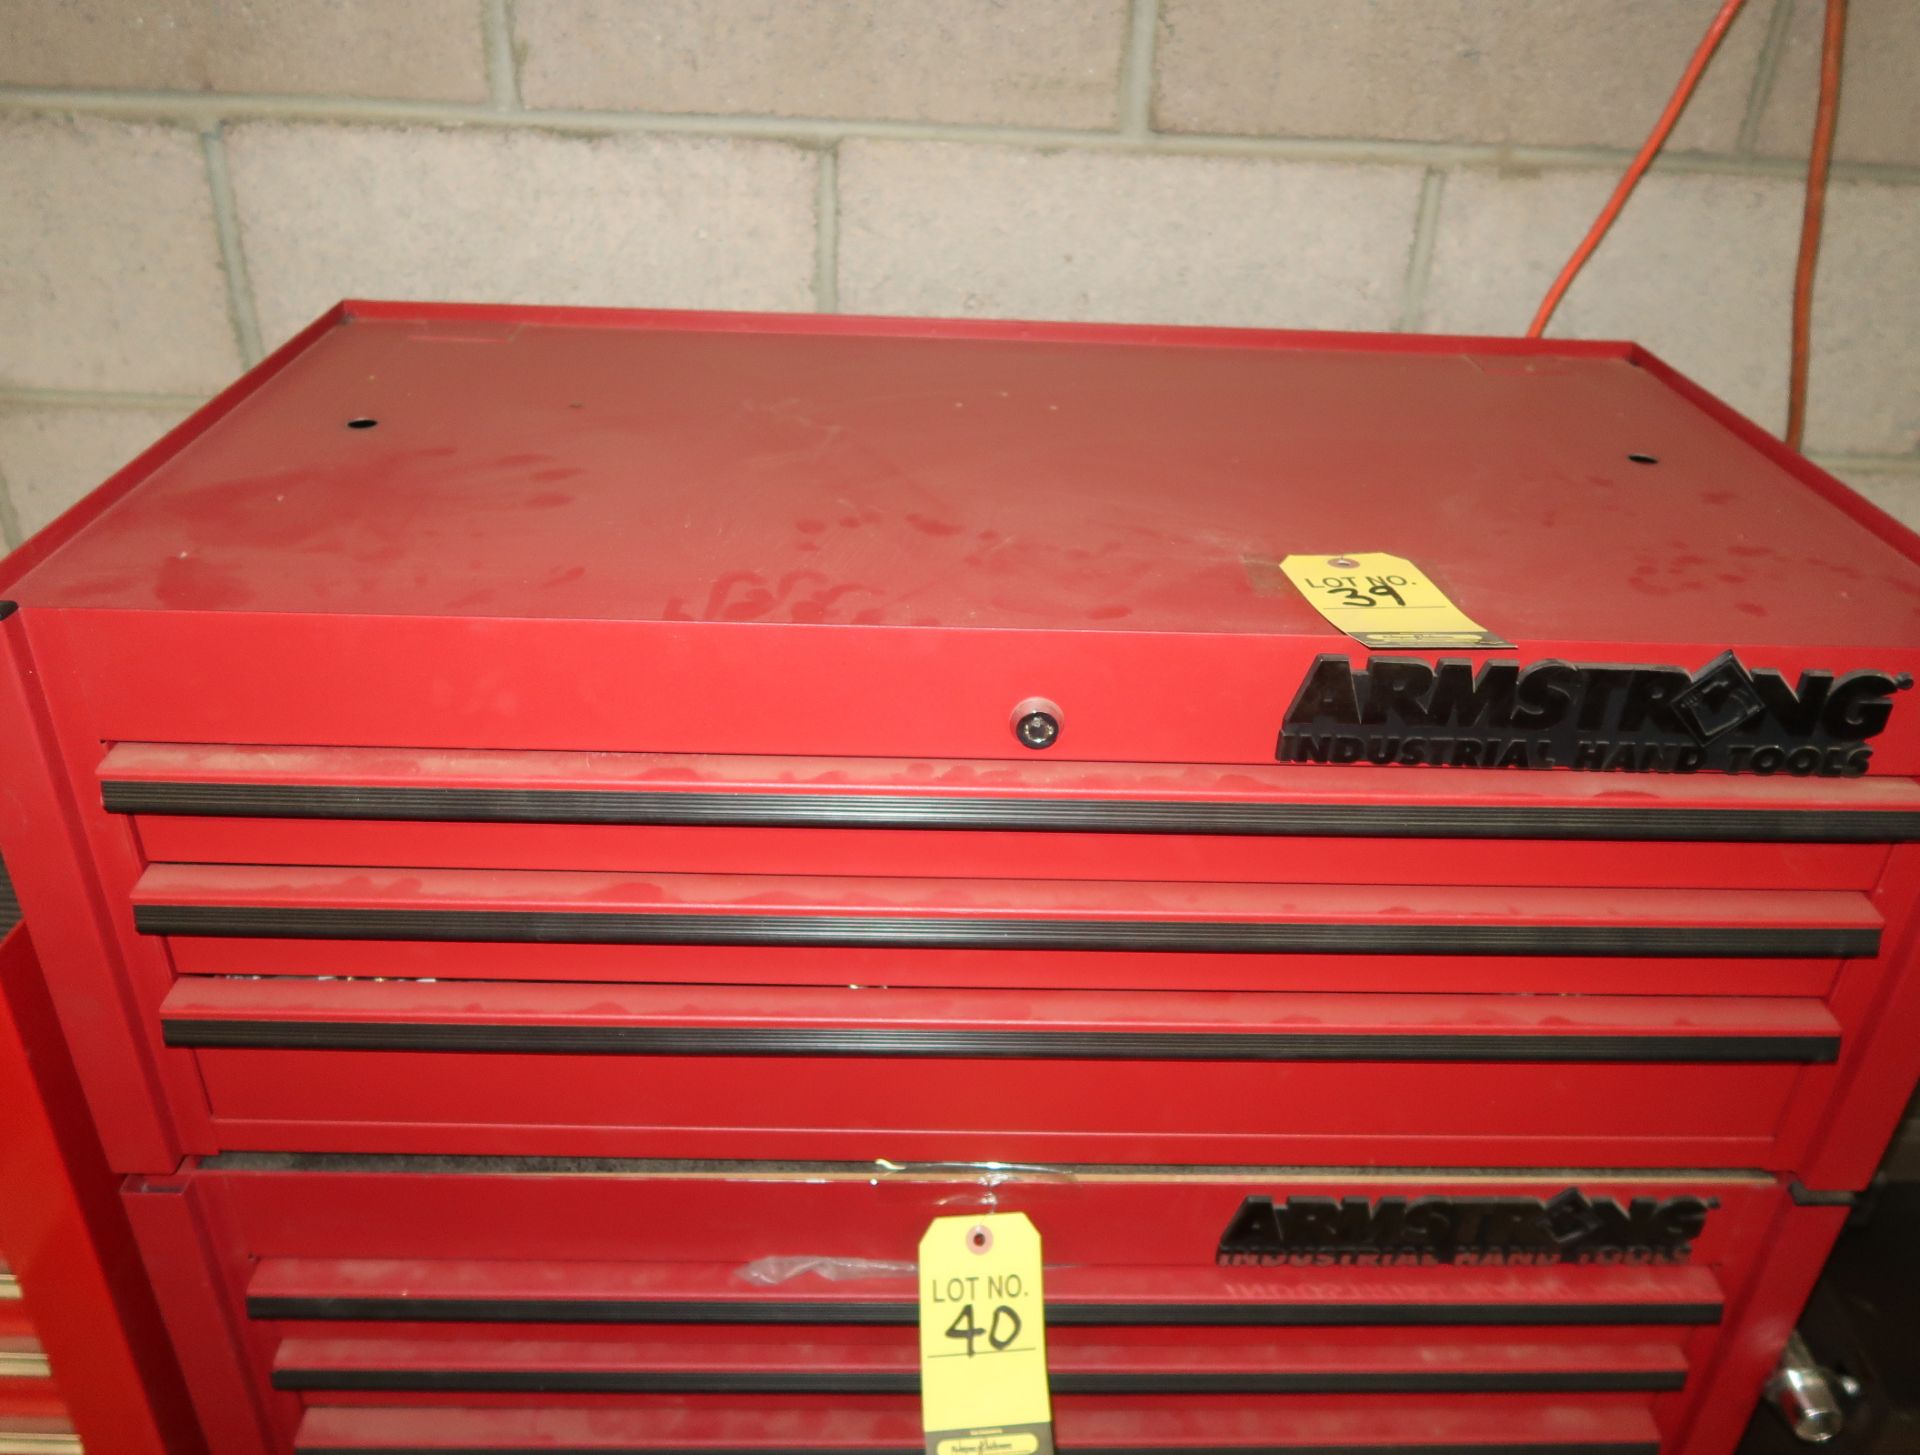 1' ARMSTRONG INDUSTRIAL TOOL BOX (LOCKED, NO KEY, FULL)